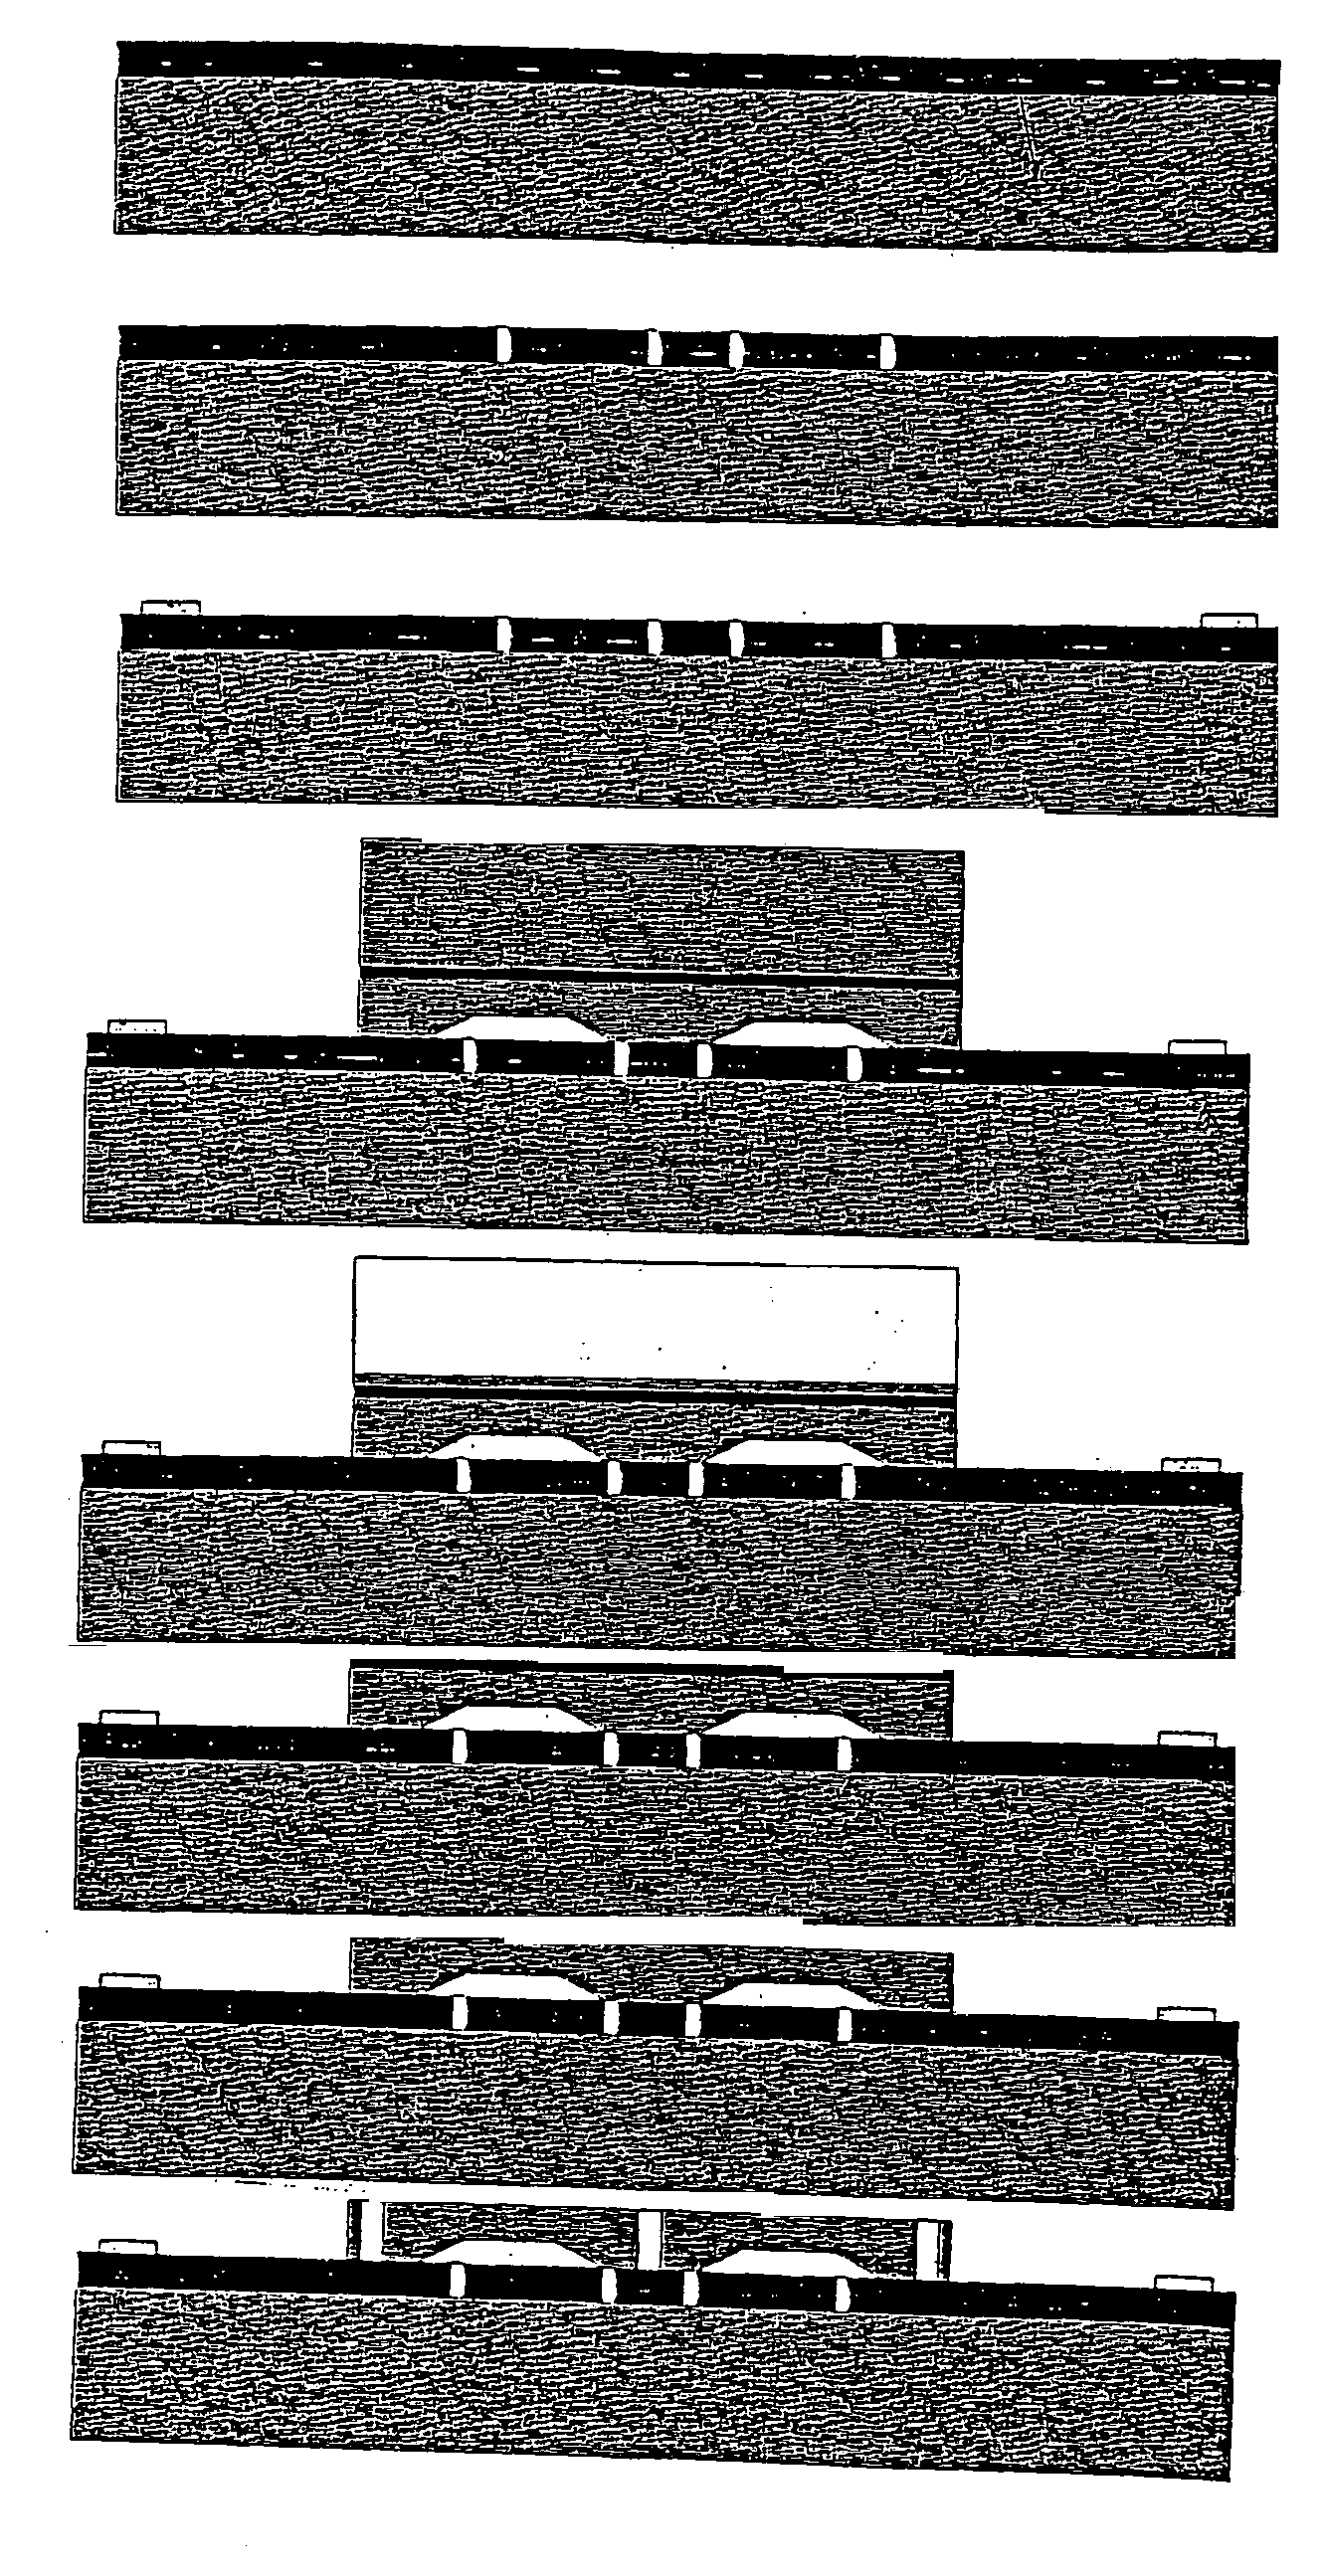 Method for microfabricating structures using silicon-on-insulator material